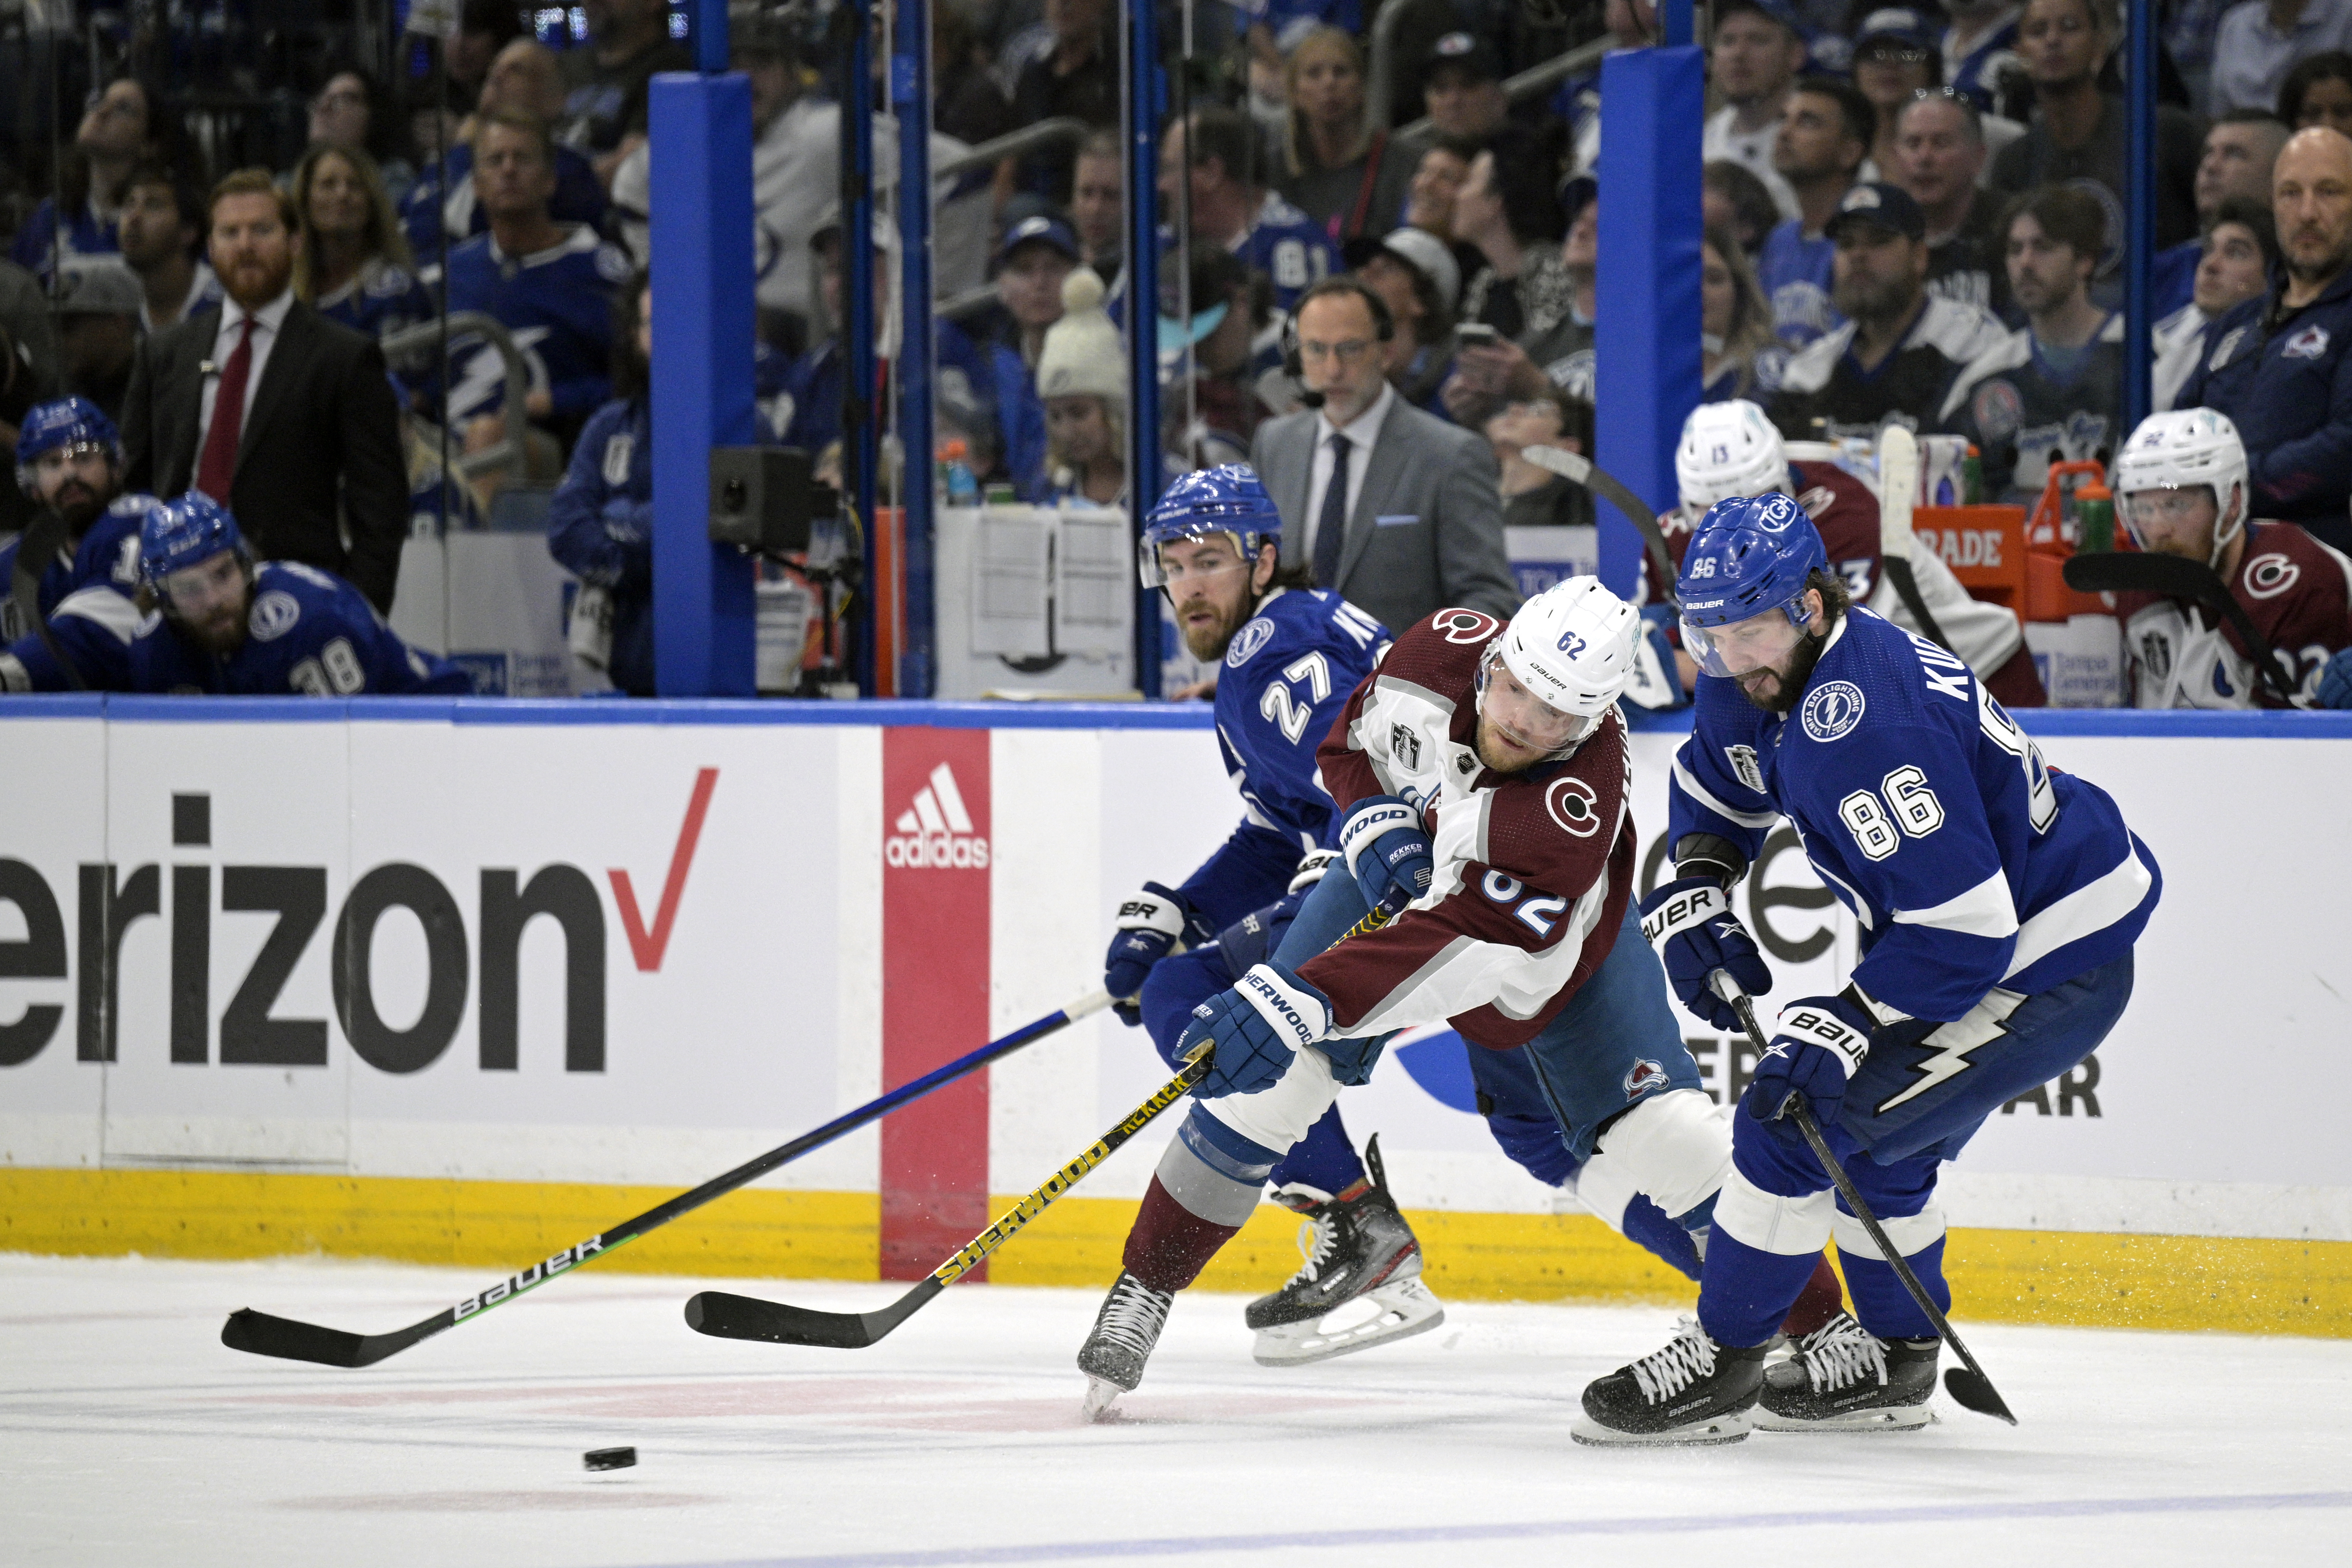 Avalanche-Lightning live stream Game 4 (6/22) How to watch Stanley Cup online for free, TV, time